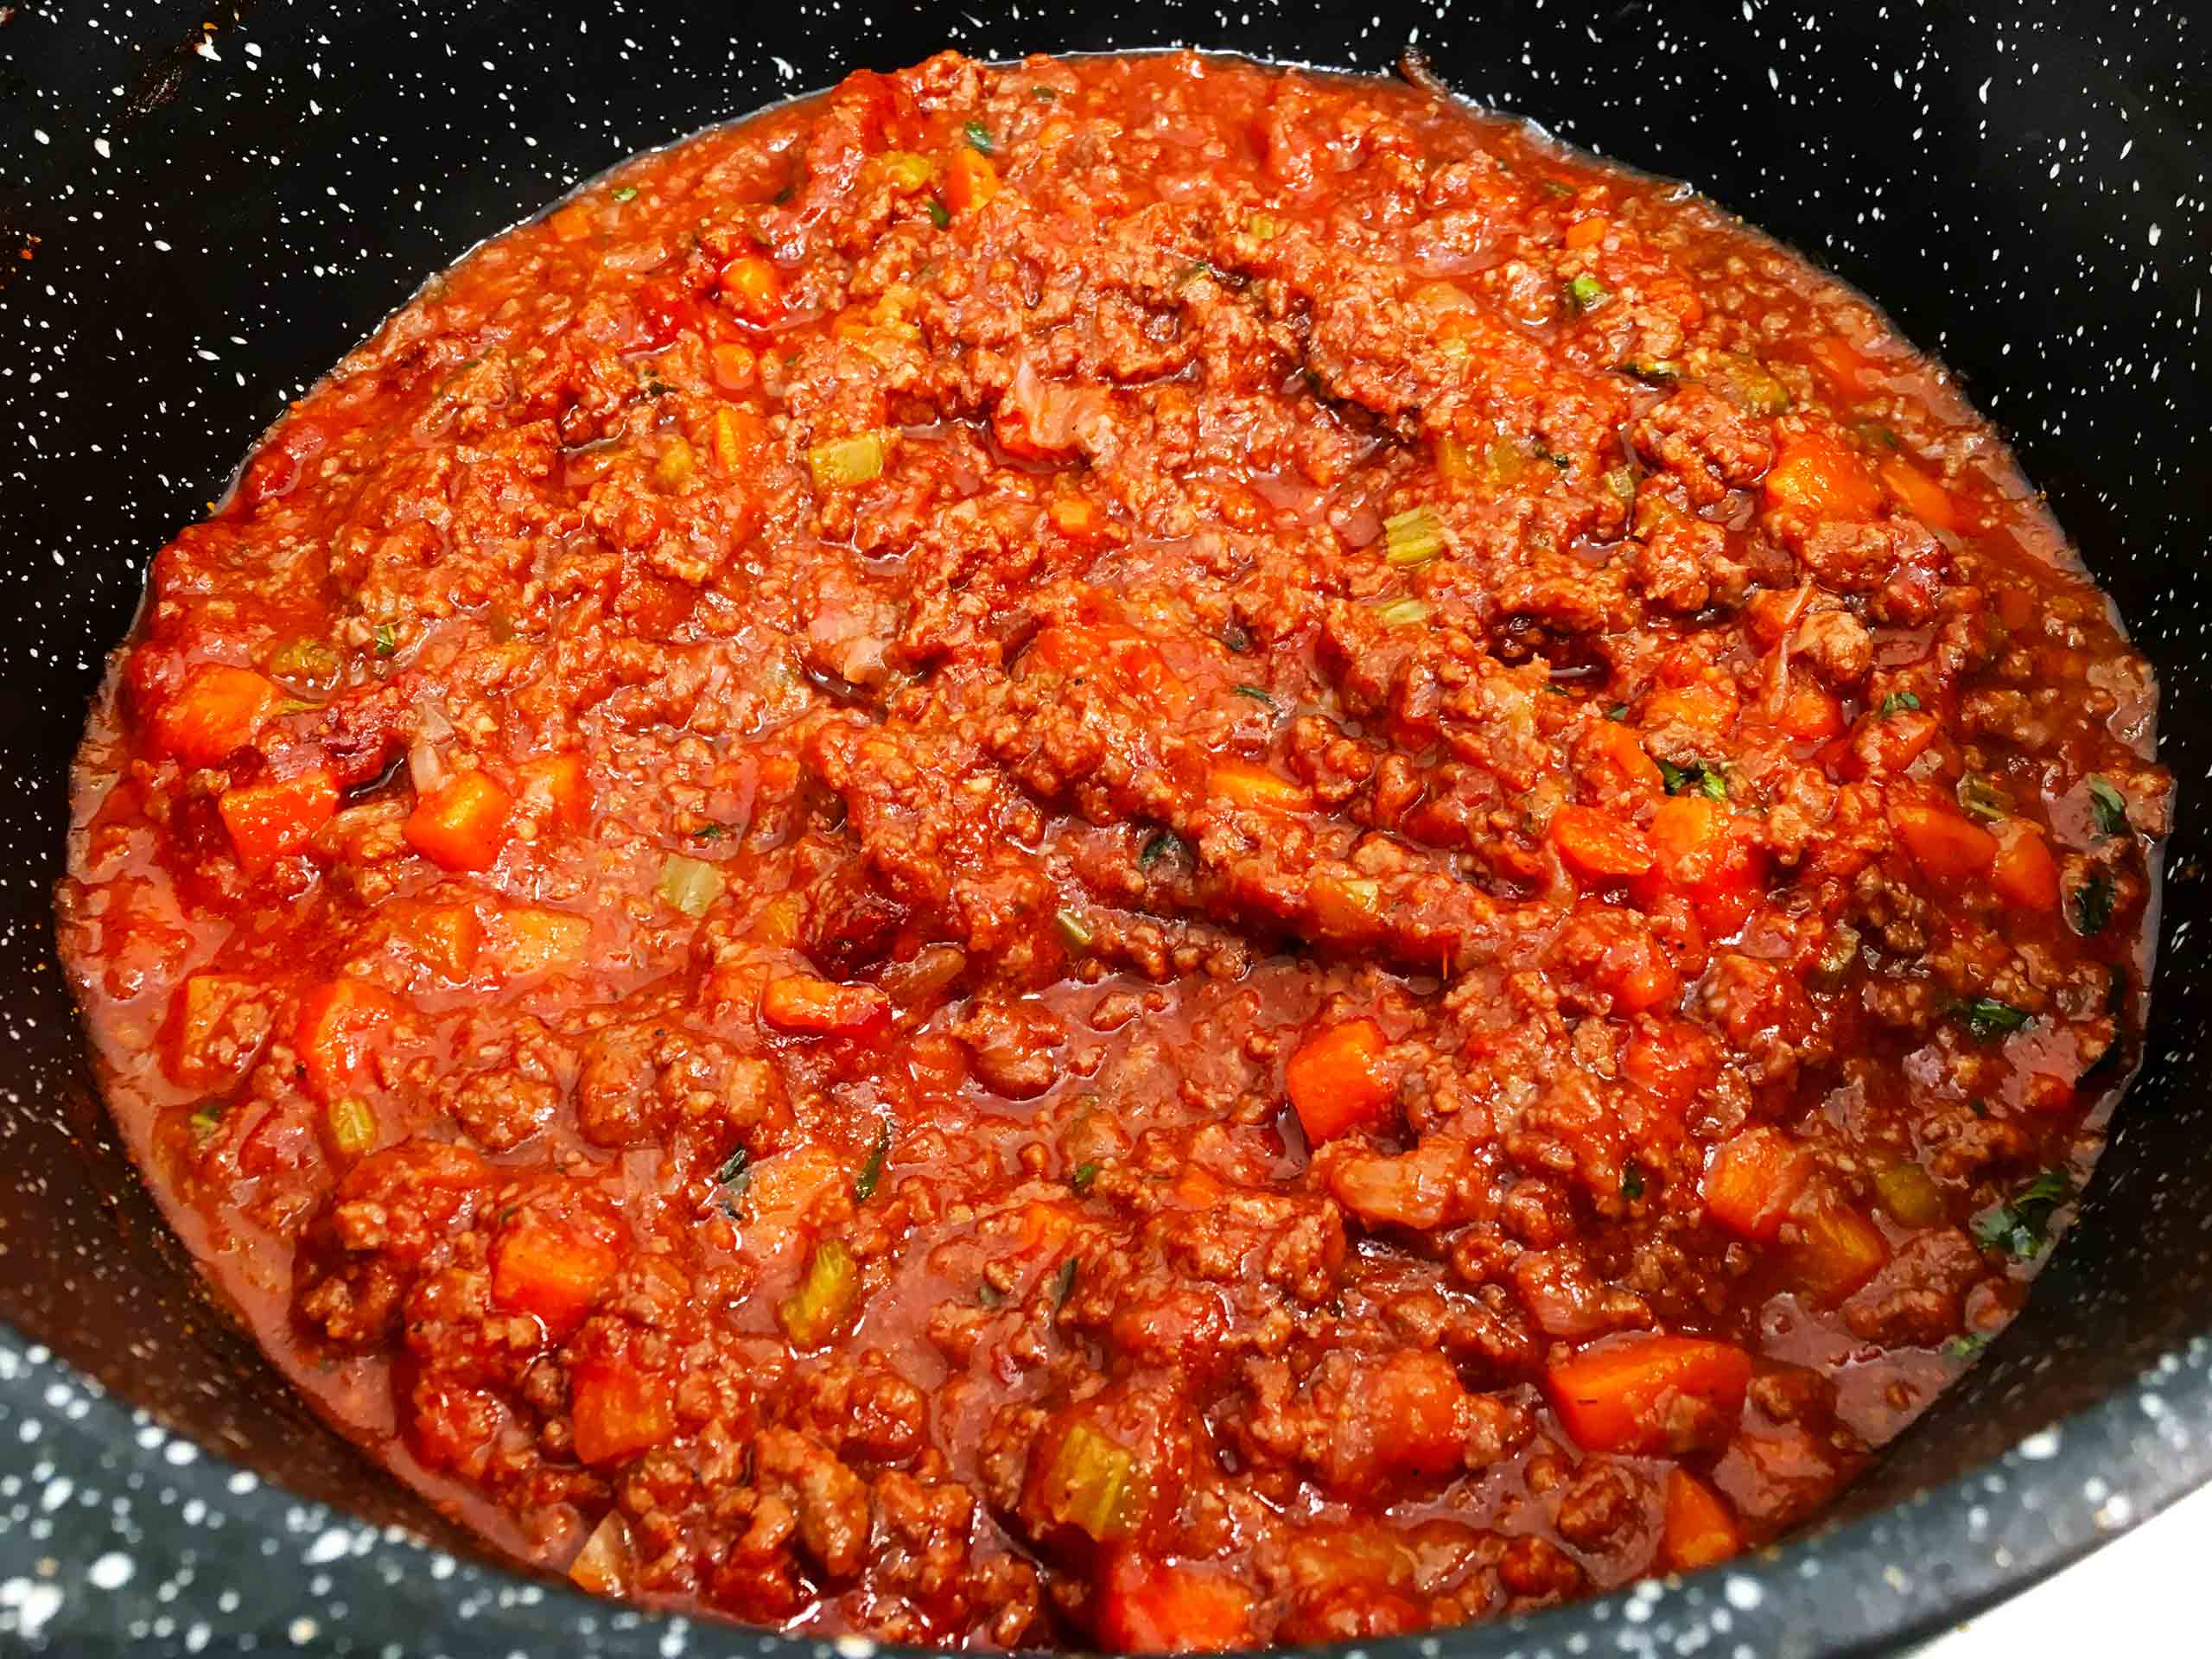 cook the bolognese sauce for 2.5 hours